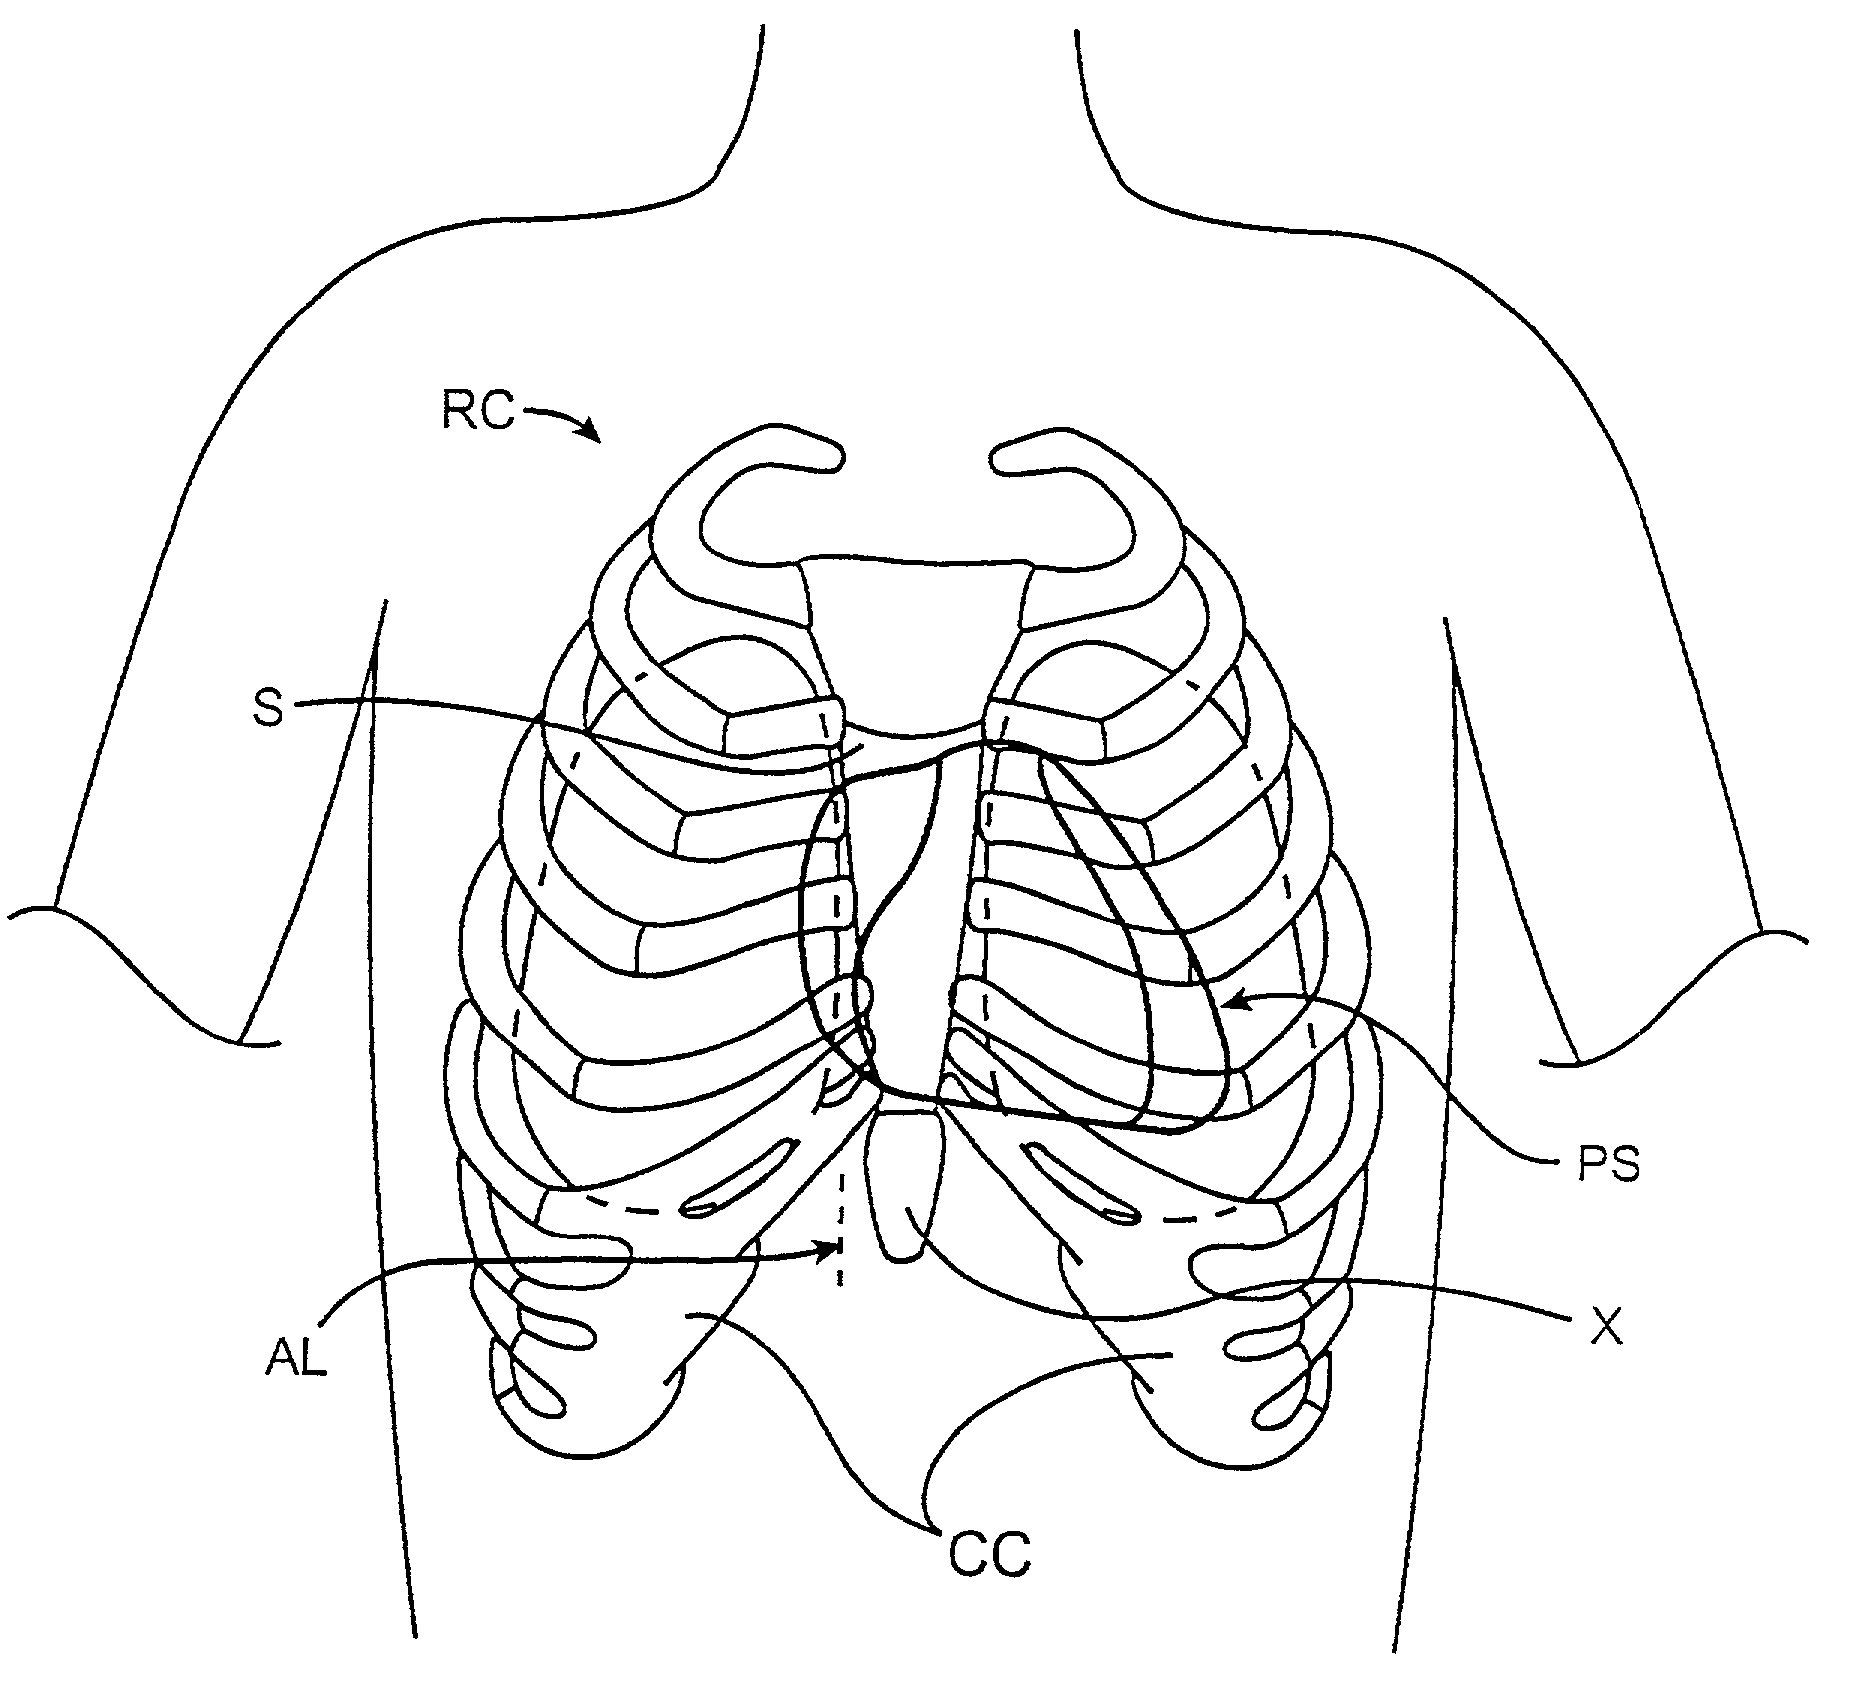 Methods and apparatus for transpericardial left atrial appendage closure